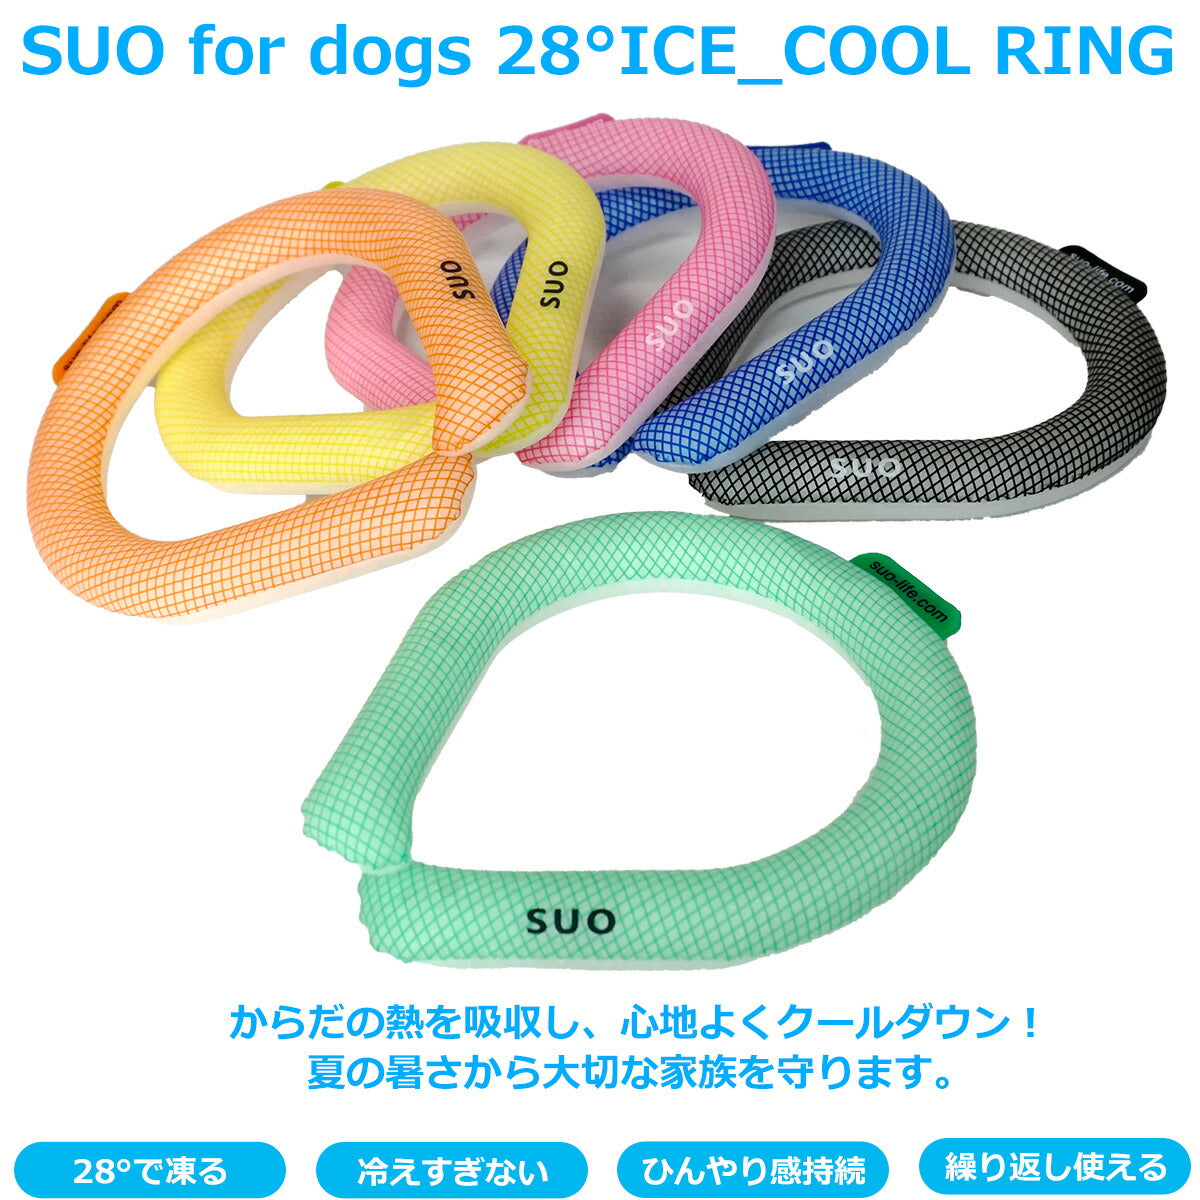 SUO for dogs 28°ICE SUOリング ボタンなし SS グリーン 熱中症対策グッズ 暑さ対策 ひんやり 首 冷感 犬 大人 子供